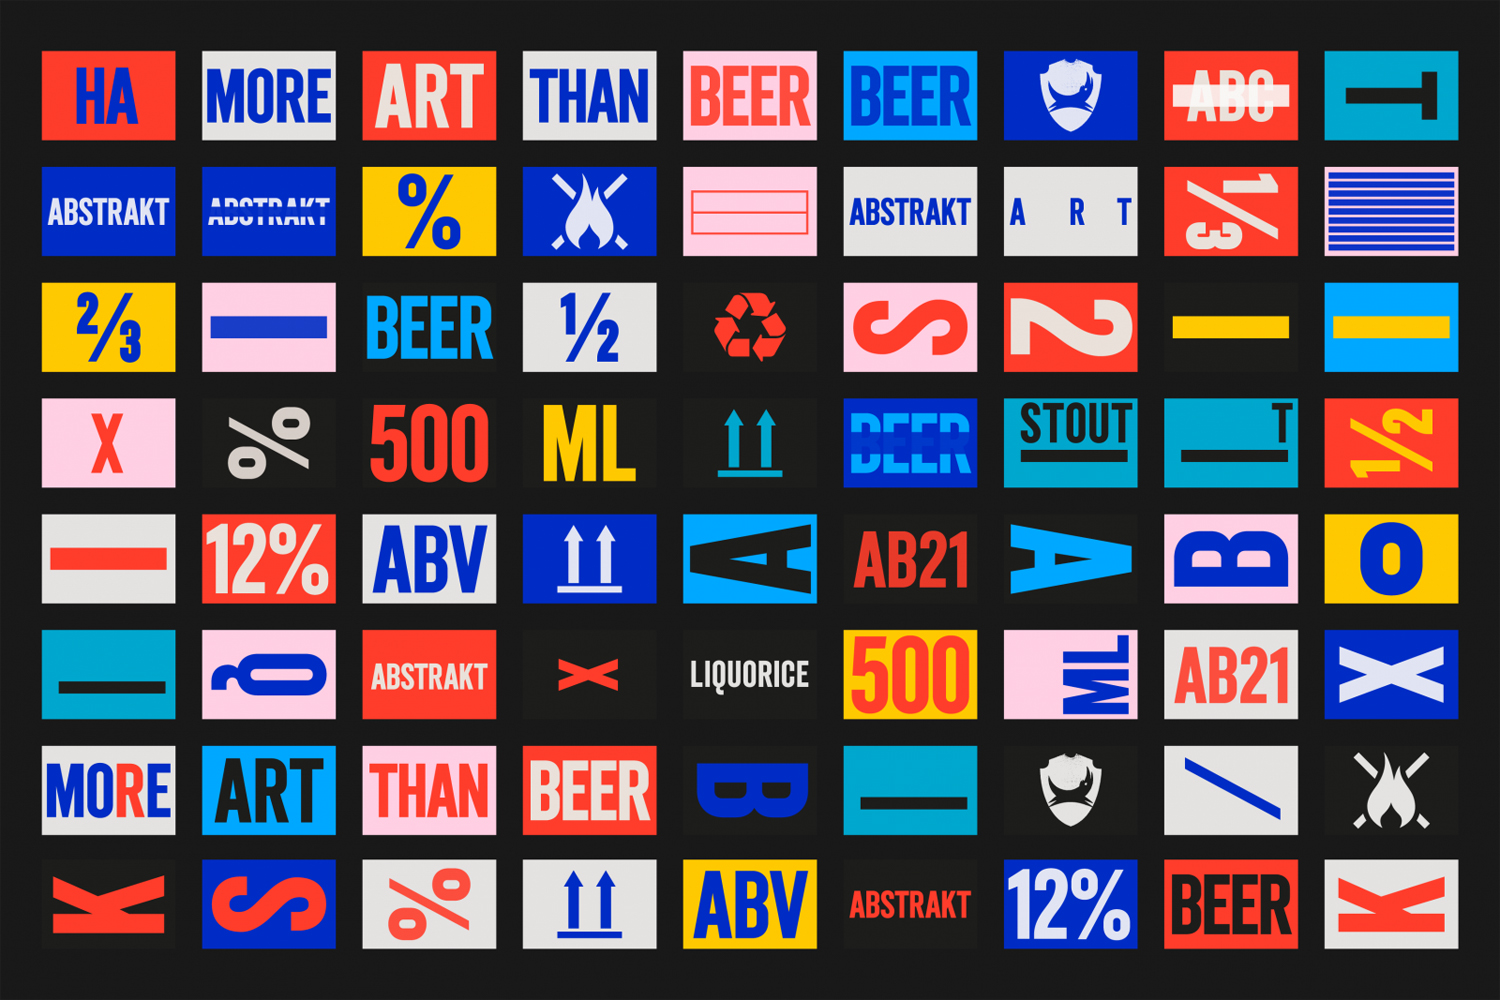 Brand identity system designed by O Street for limited edition craft beer concept Abstrakt from Brewdog